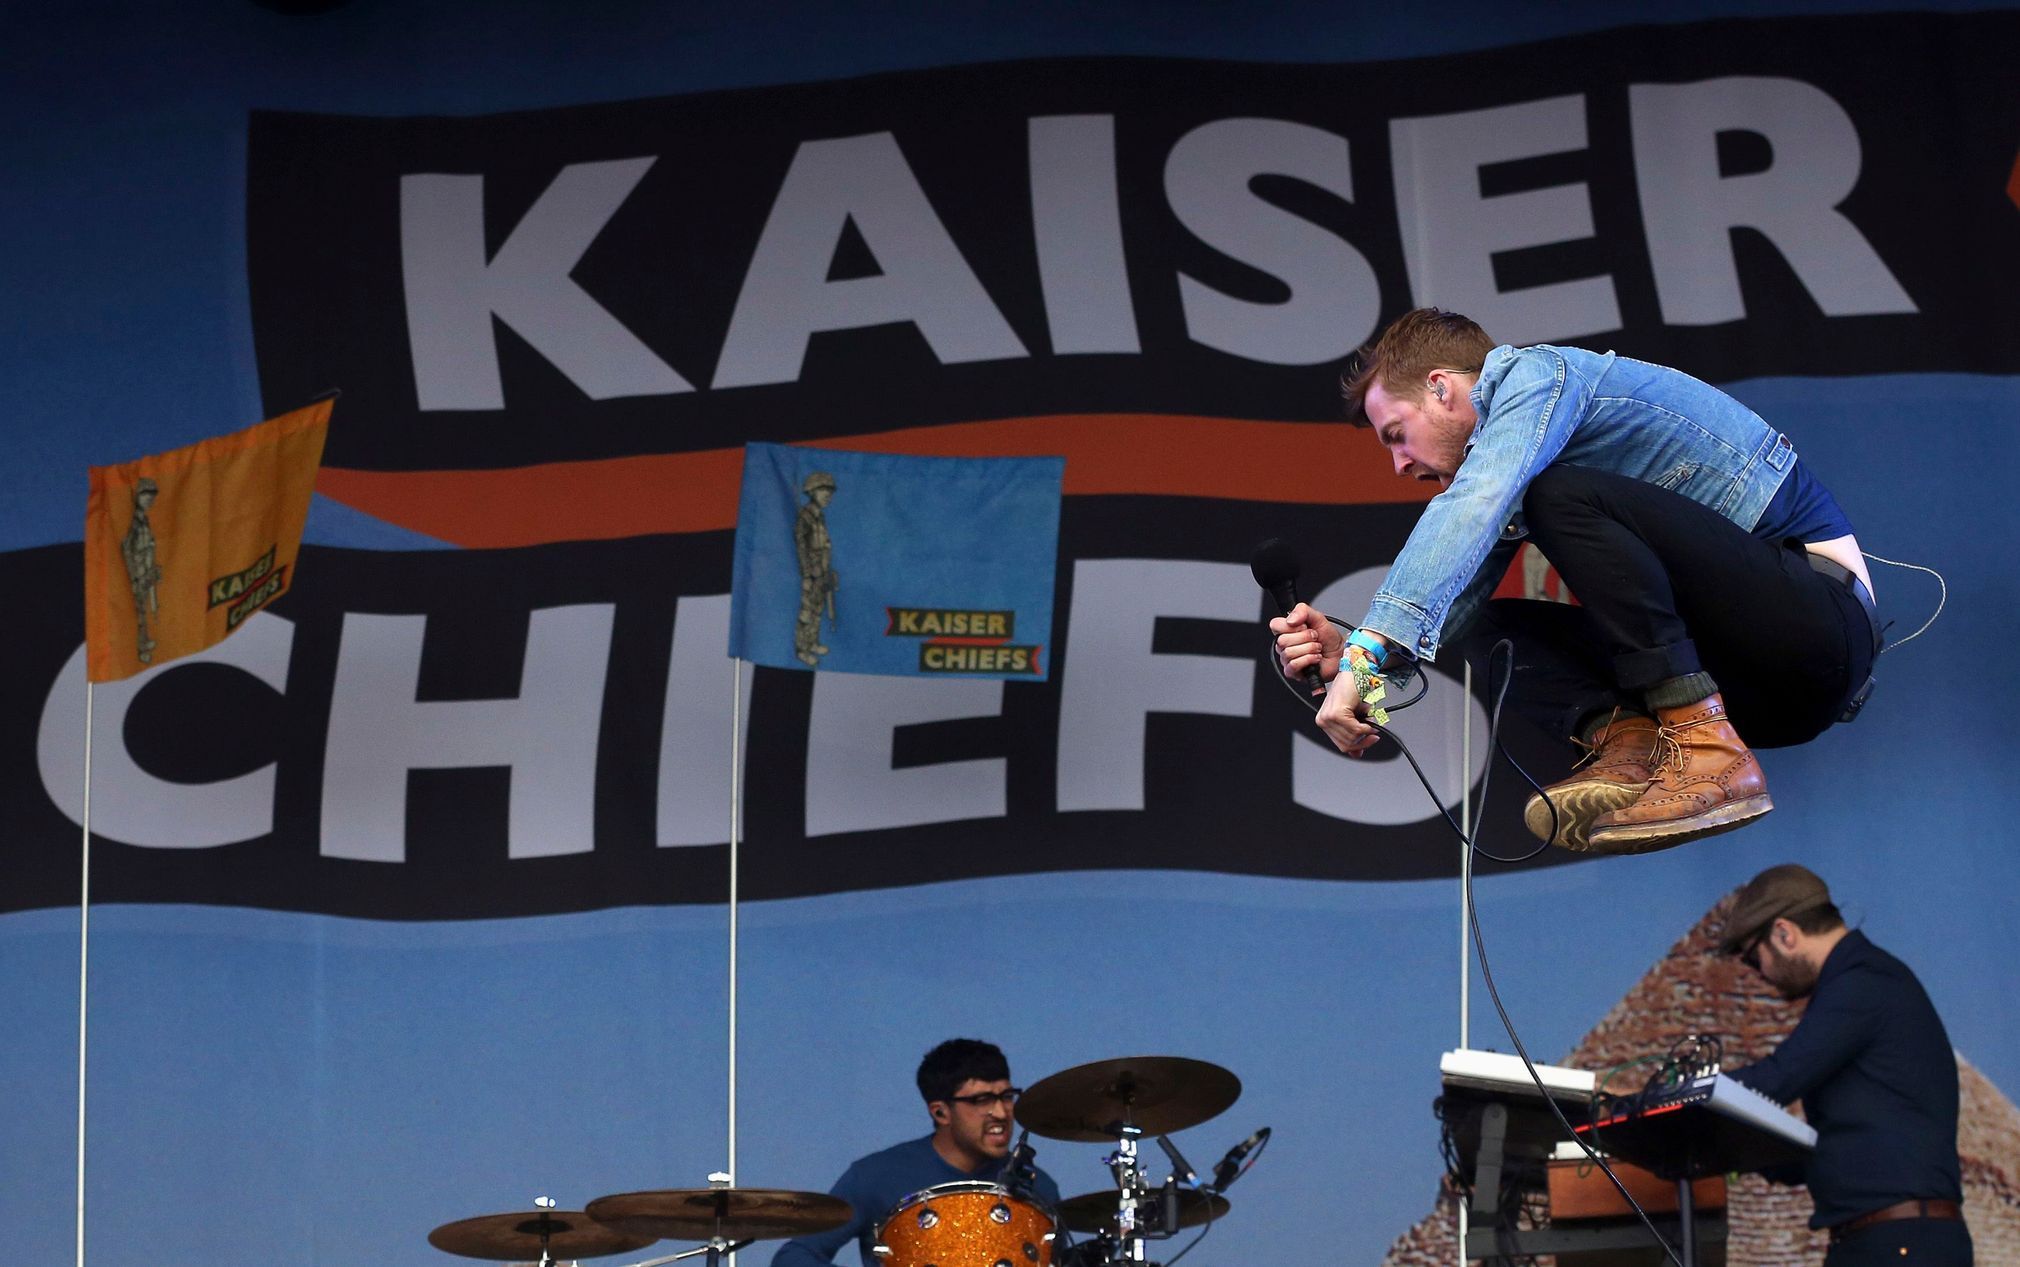 Singer Ricky Wilson of the band Kaiser Chiefs performs on the Other Stage at Worthy Farm in Somerset, on the third day of the Glastonbury music festival